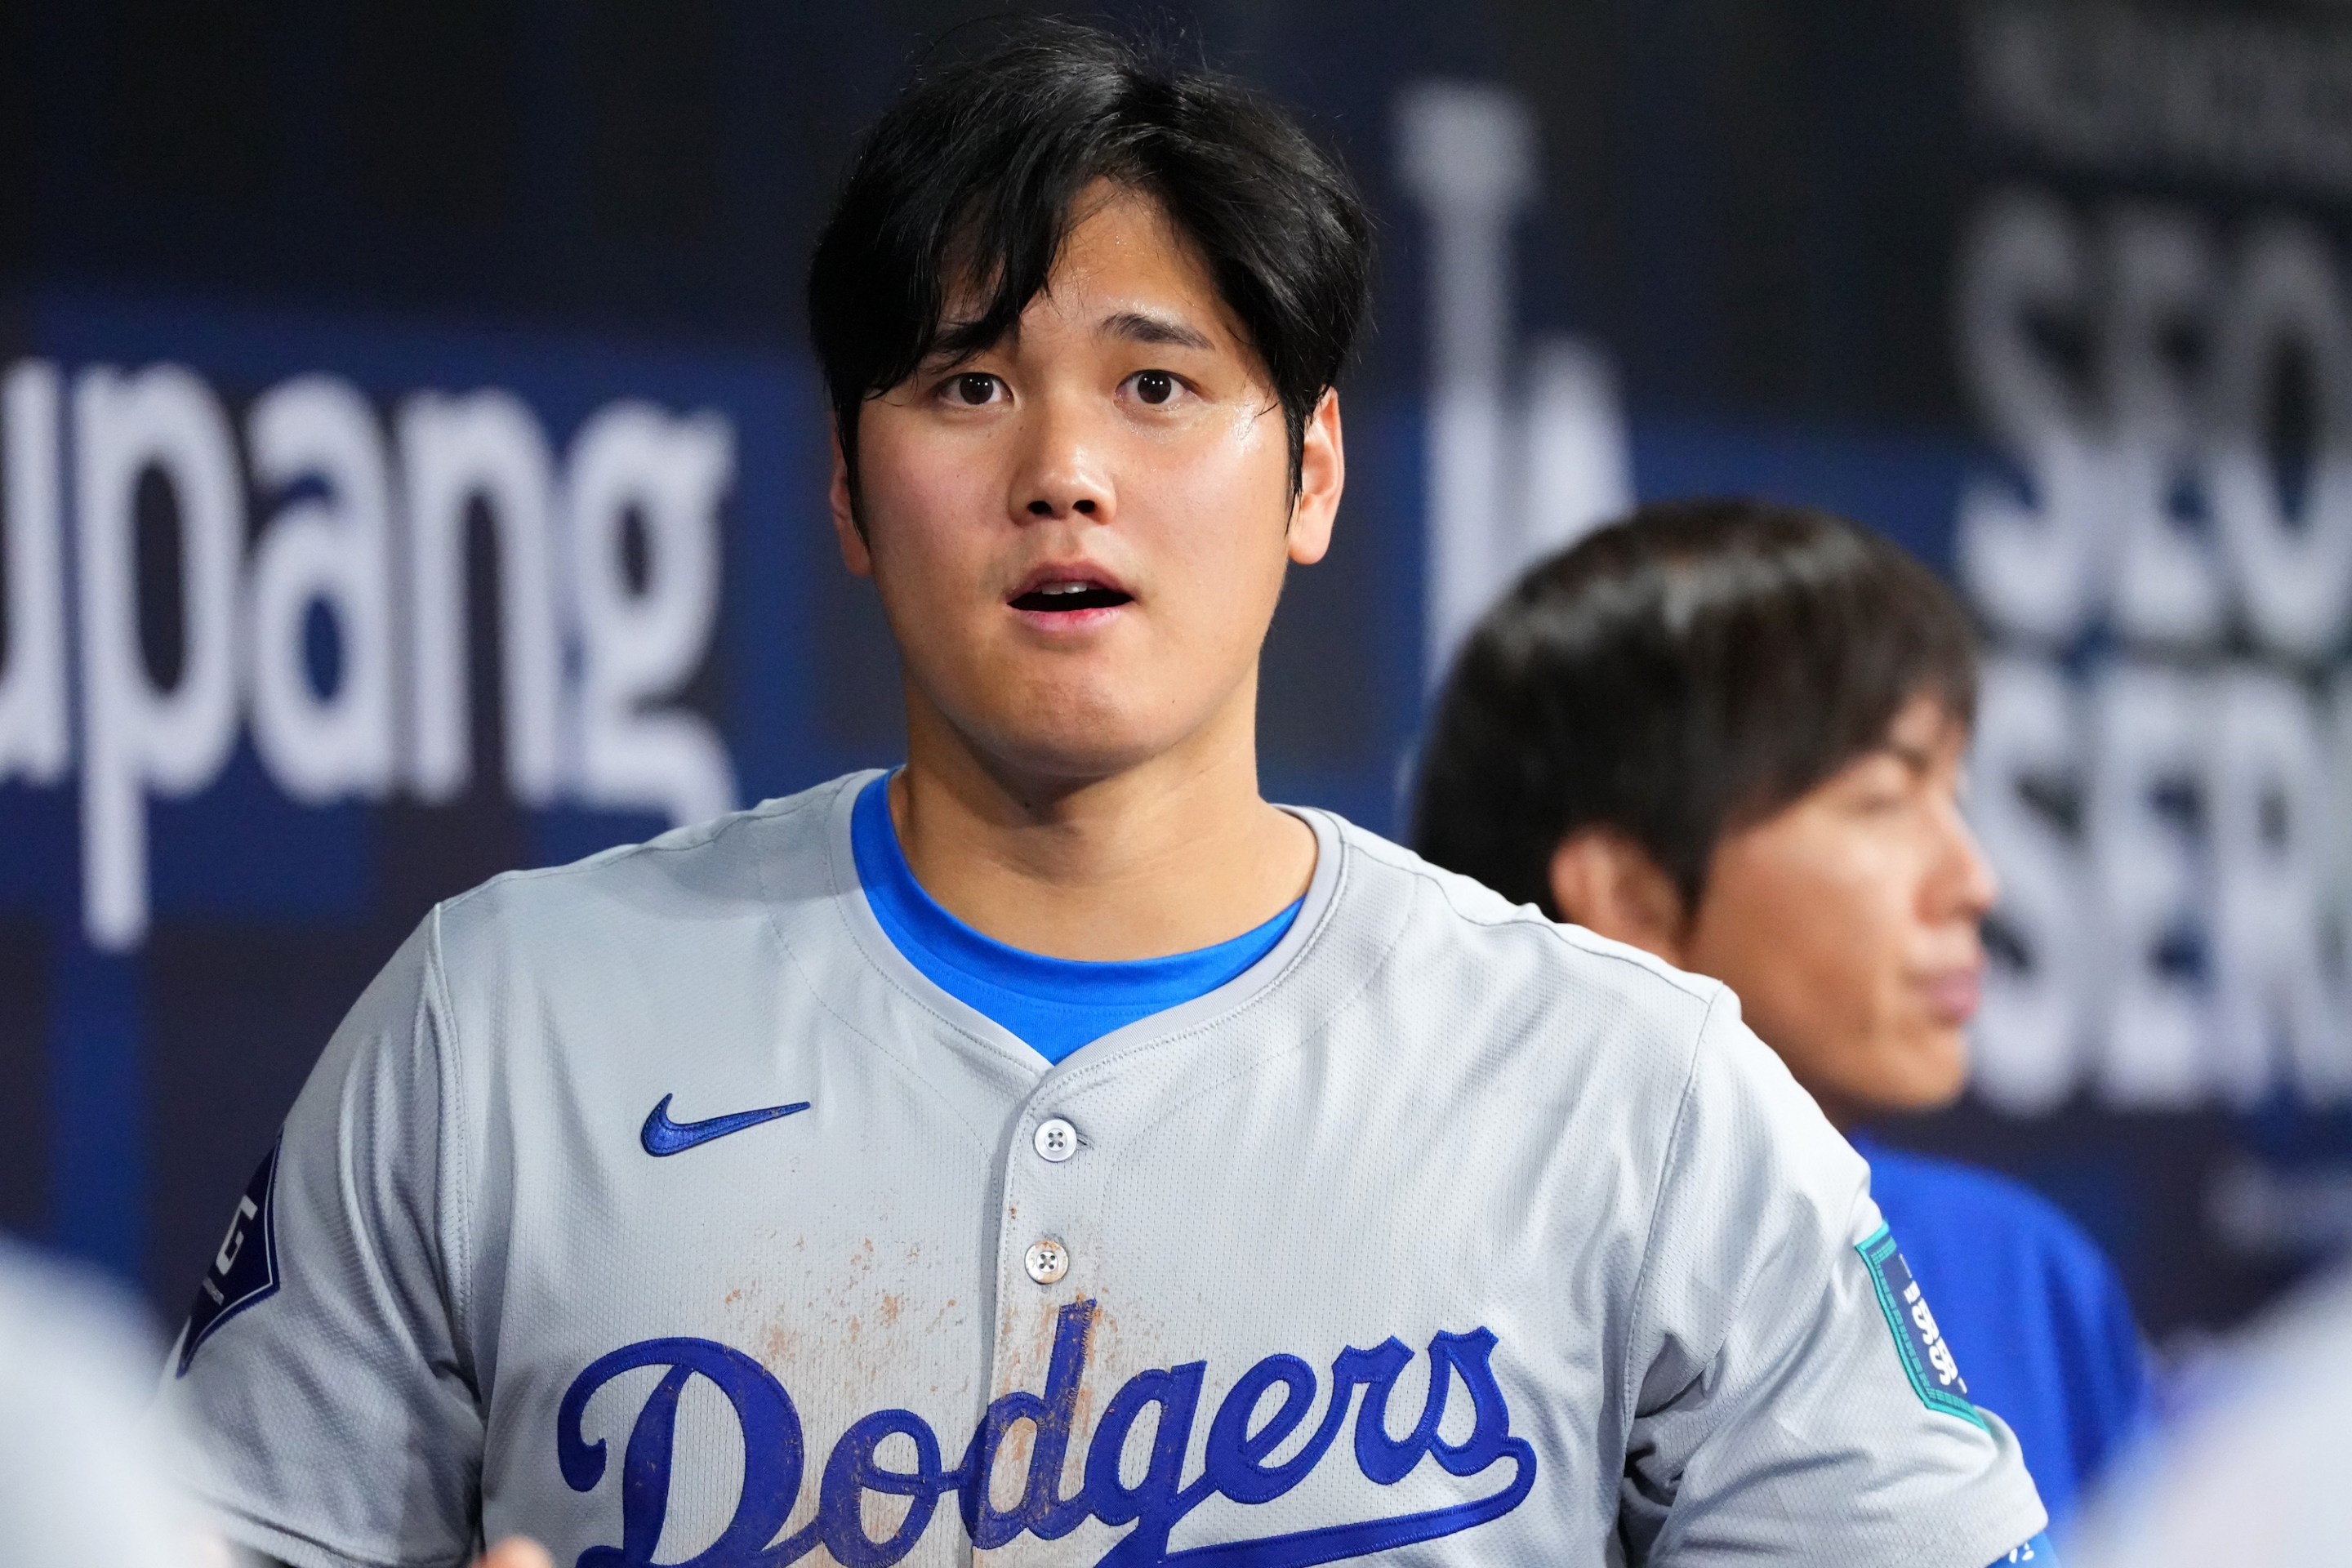 SEOUL, SOUTH KOREA - MARCH 20: Shohei Ohtani #17 of the Los Angeles Dodgers is seen while his interpreter Ippei Mizuhara is seen in the dugout during the 2024 Seoul Series game between Los Angeles Dodgers and San Diego Padres at Gocheok Sky Dome on March 20, 2024 in Seoul, South Korea. (Photo by Masterpress/Getty Images)